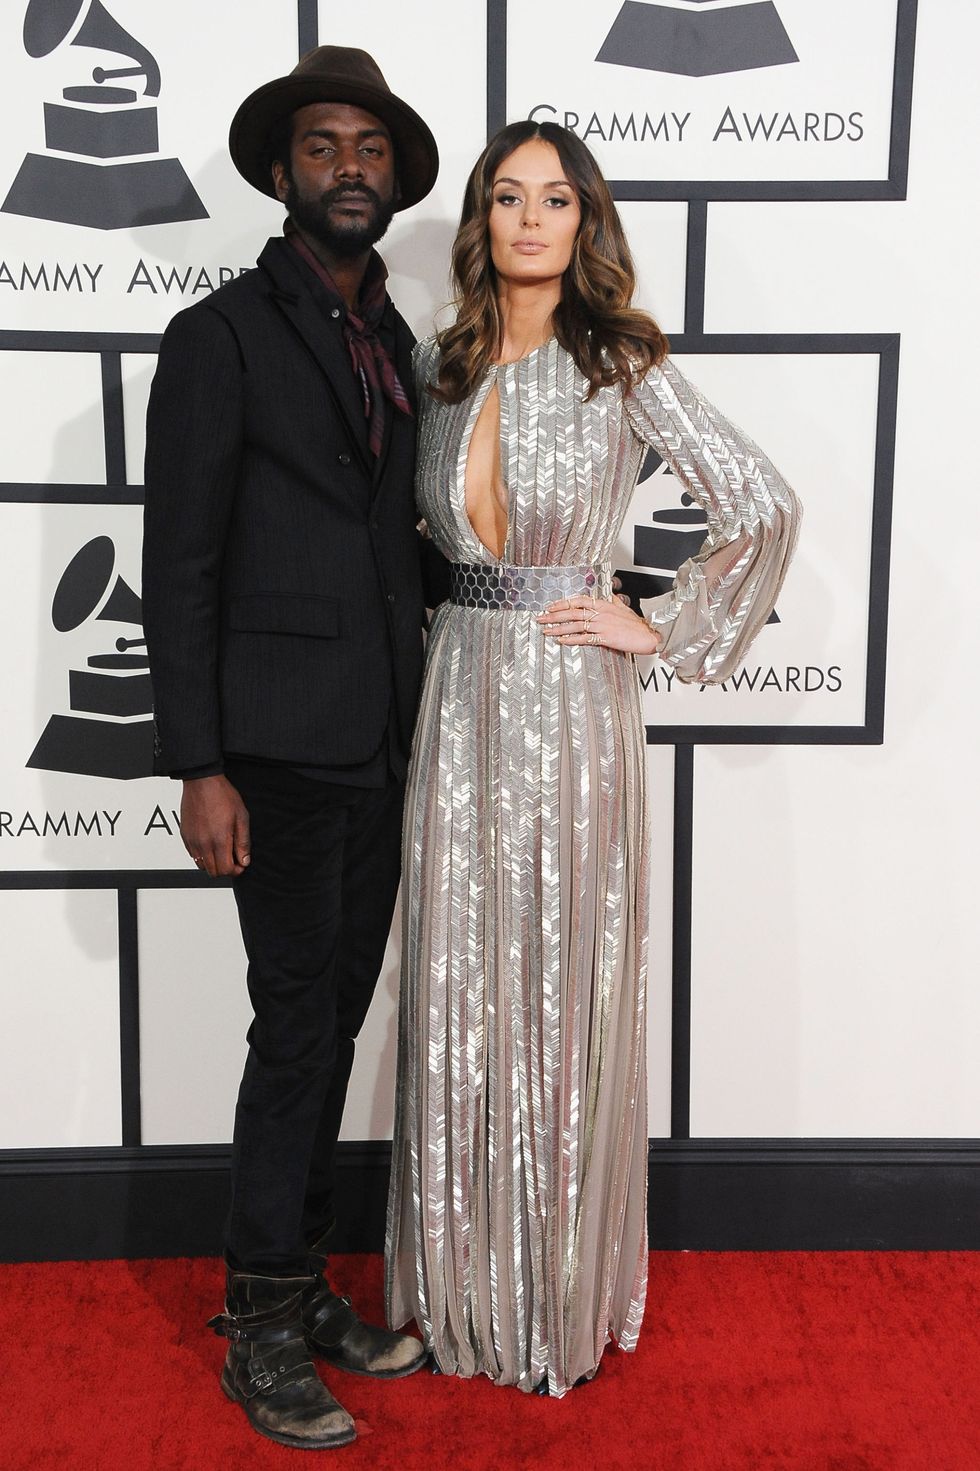 LOS ANGELES, CA - JANUARY 26:  Recording artist Gary Clark, Jr. (L) and model Nicole Trunfio attend the 56th GRAMMY Awards at Staples Center on January 26, 2014 in Los Angeles, California.  (Photo by Steve Granitz/WireImage)